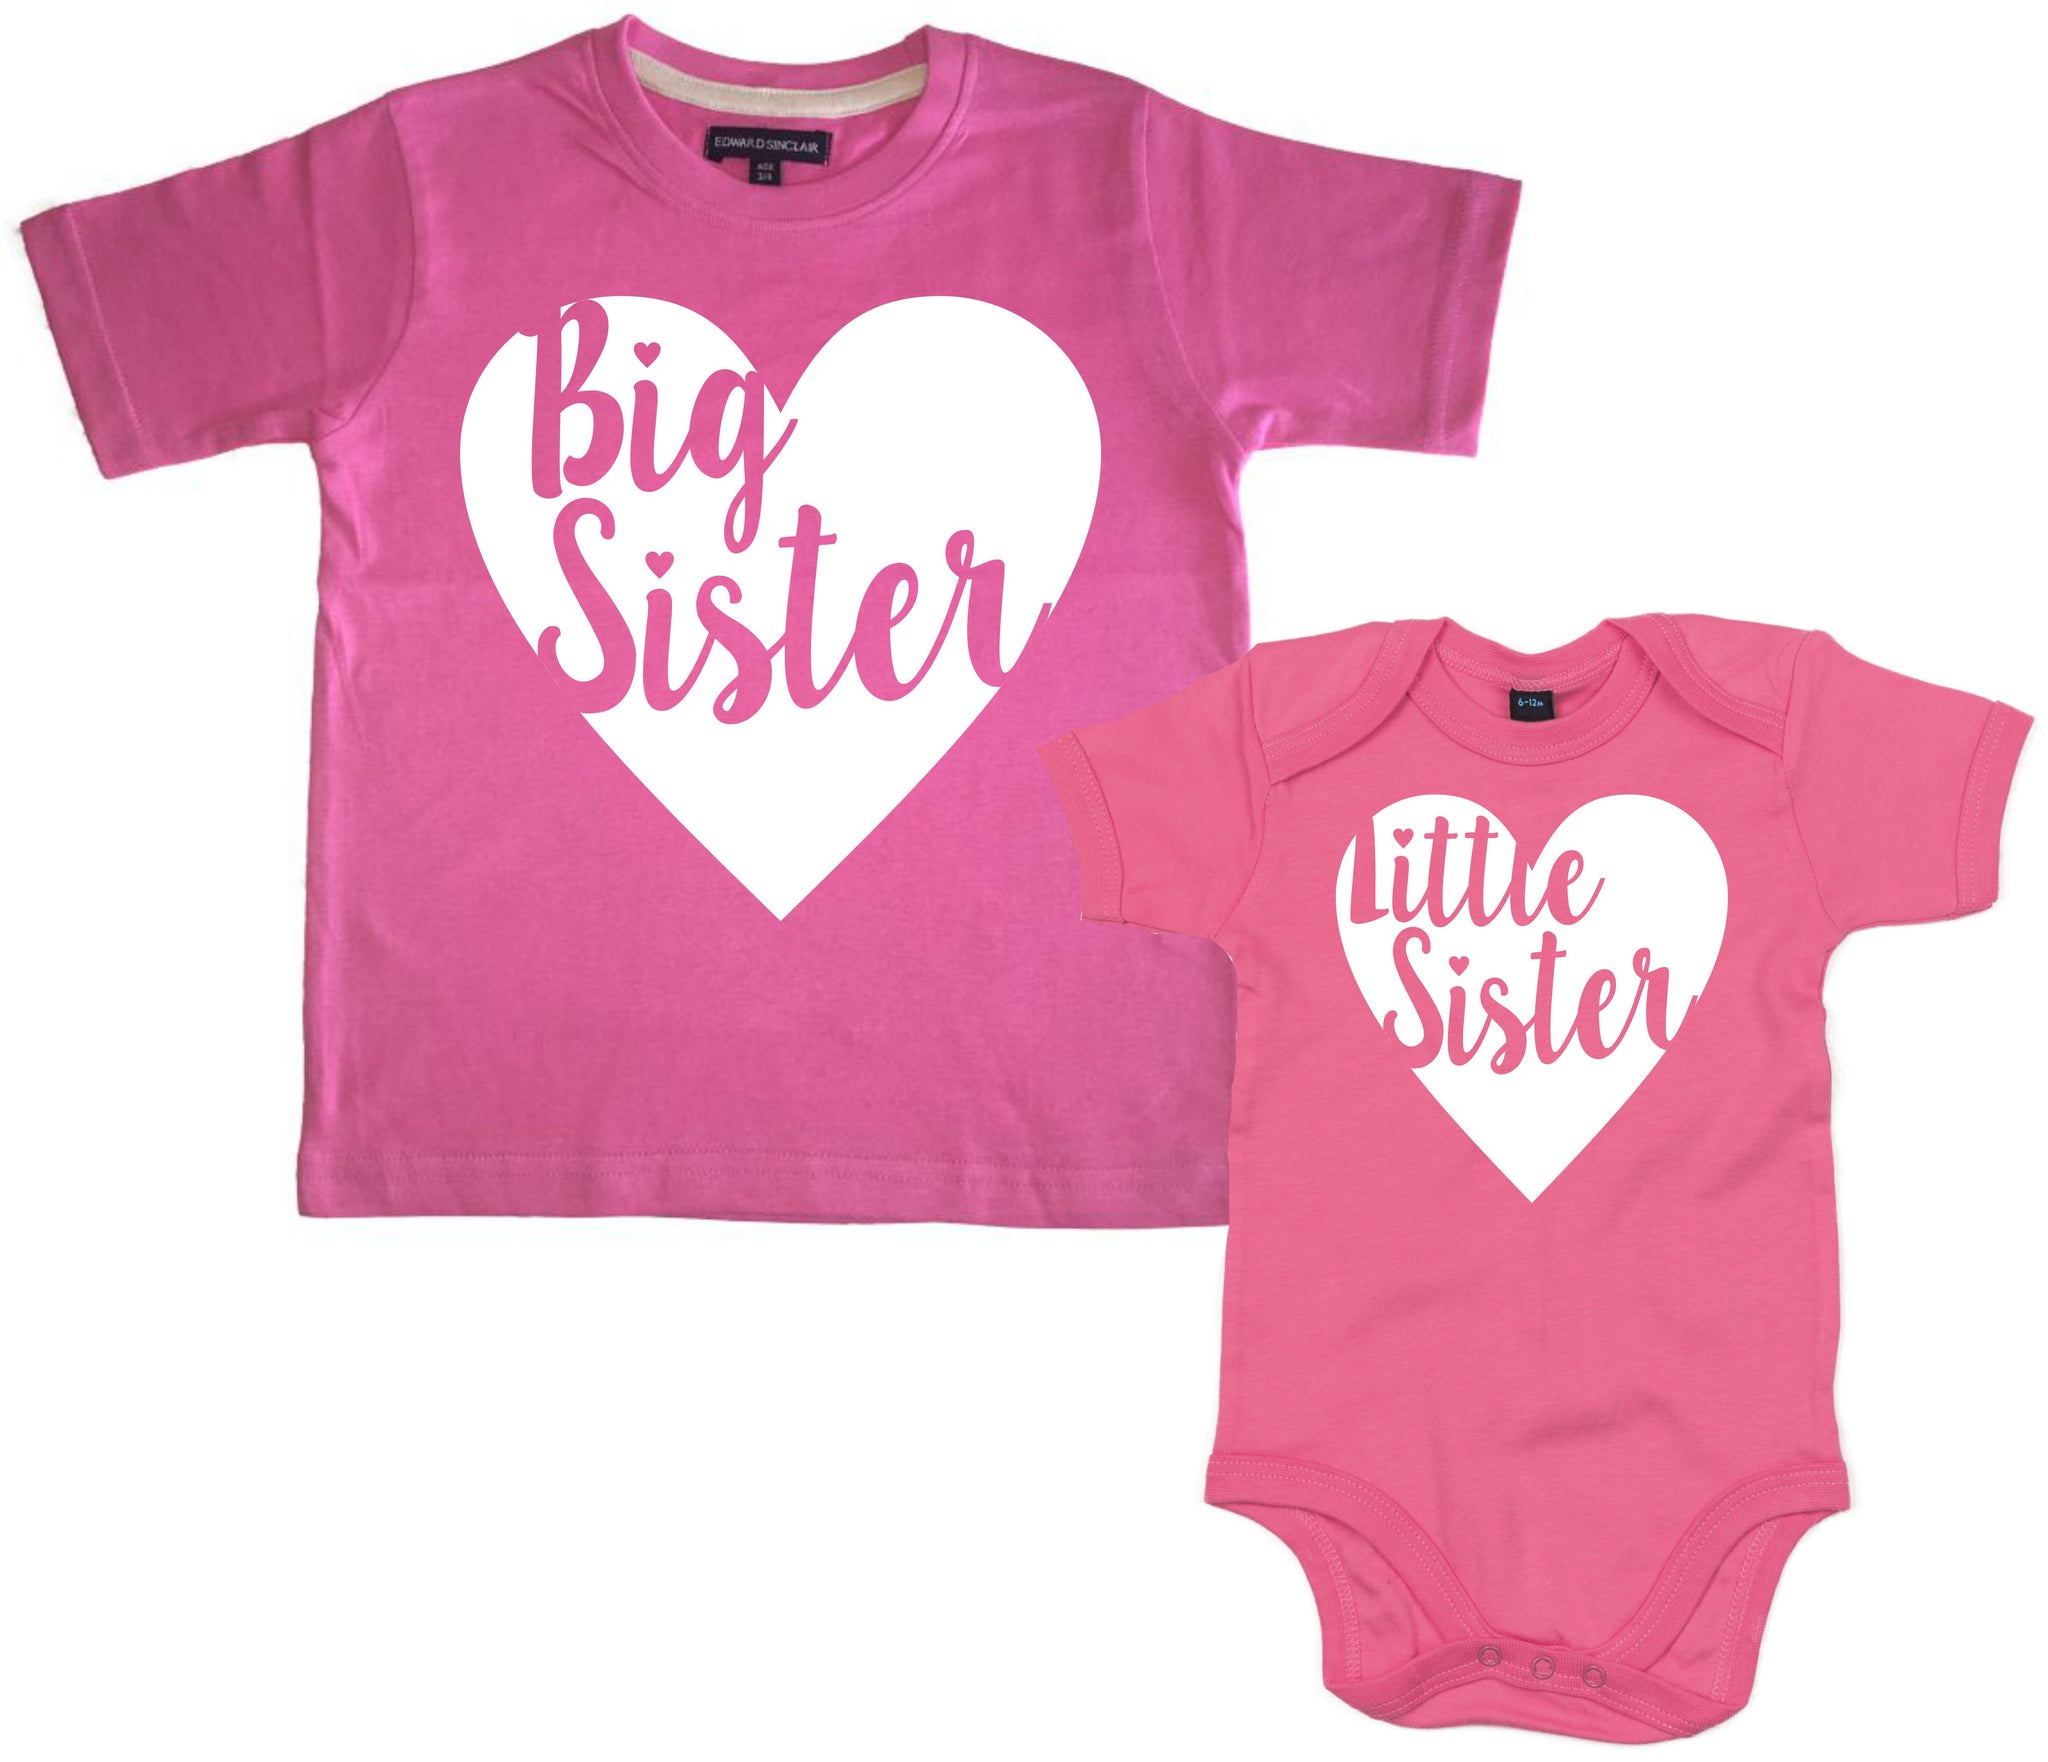 Big Sister and Little Sister Heart T Shirt and Baby Bodysuit Set